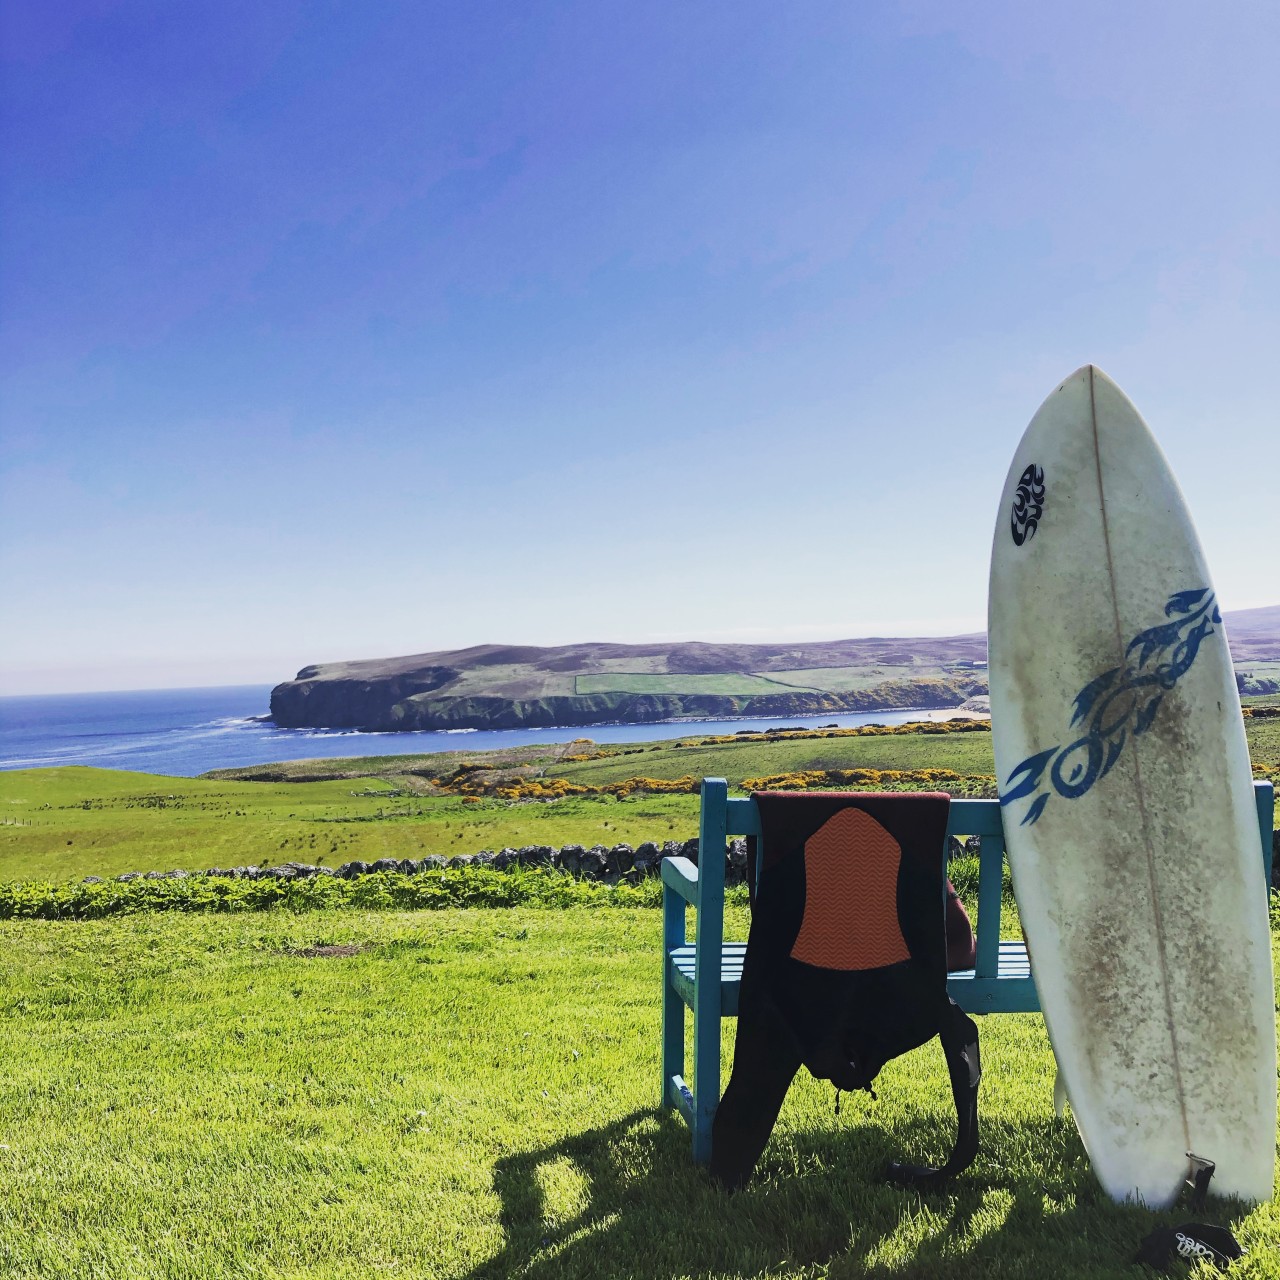 Surfboard leaning against a garden seat with coastal views in background